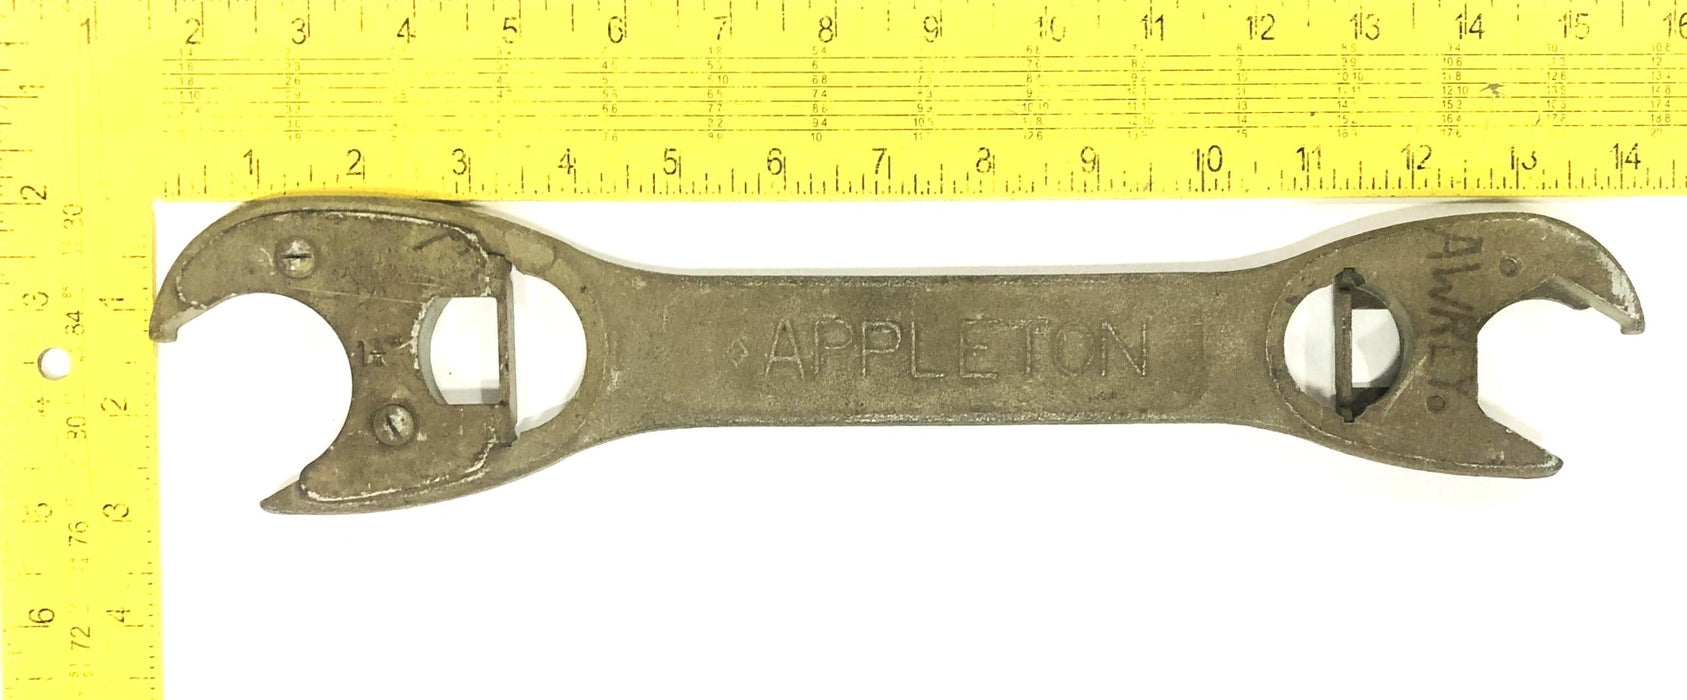 Appleton 1 Inch To 1-1/4 Inch Conduit Wrench TW-W1125 USED